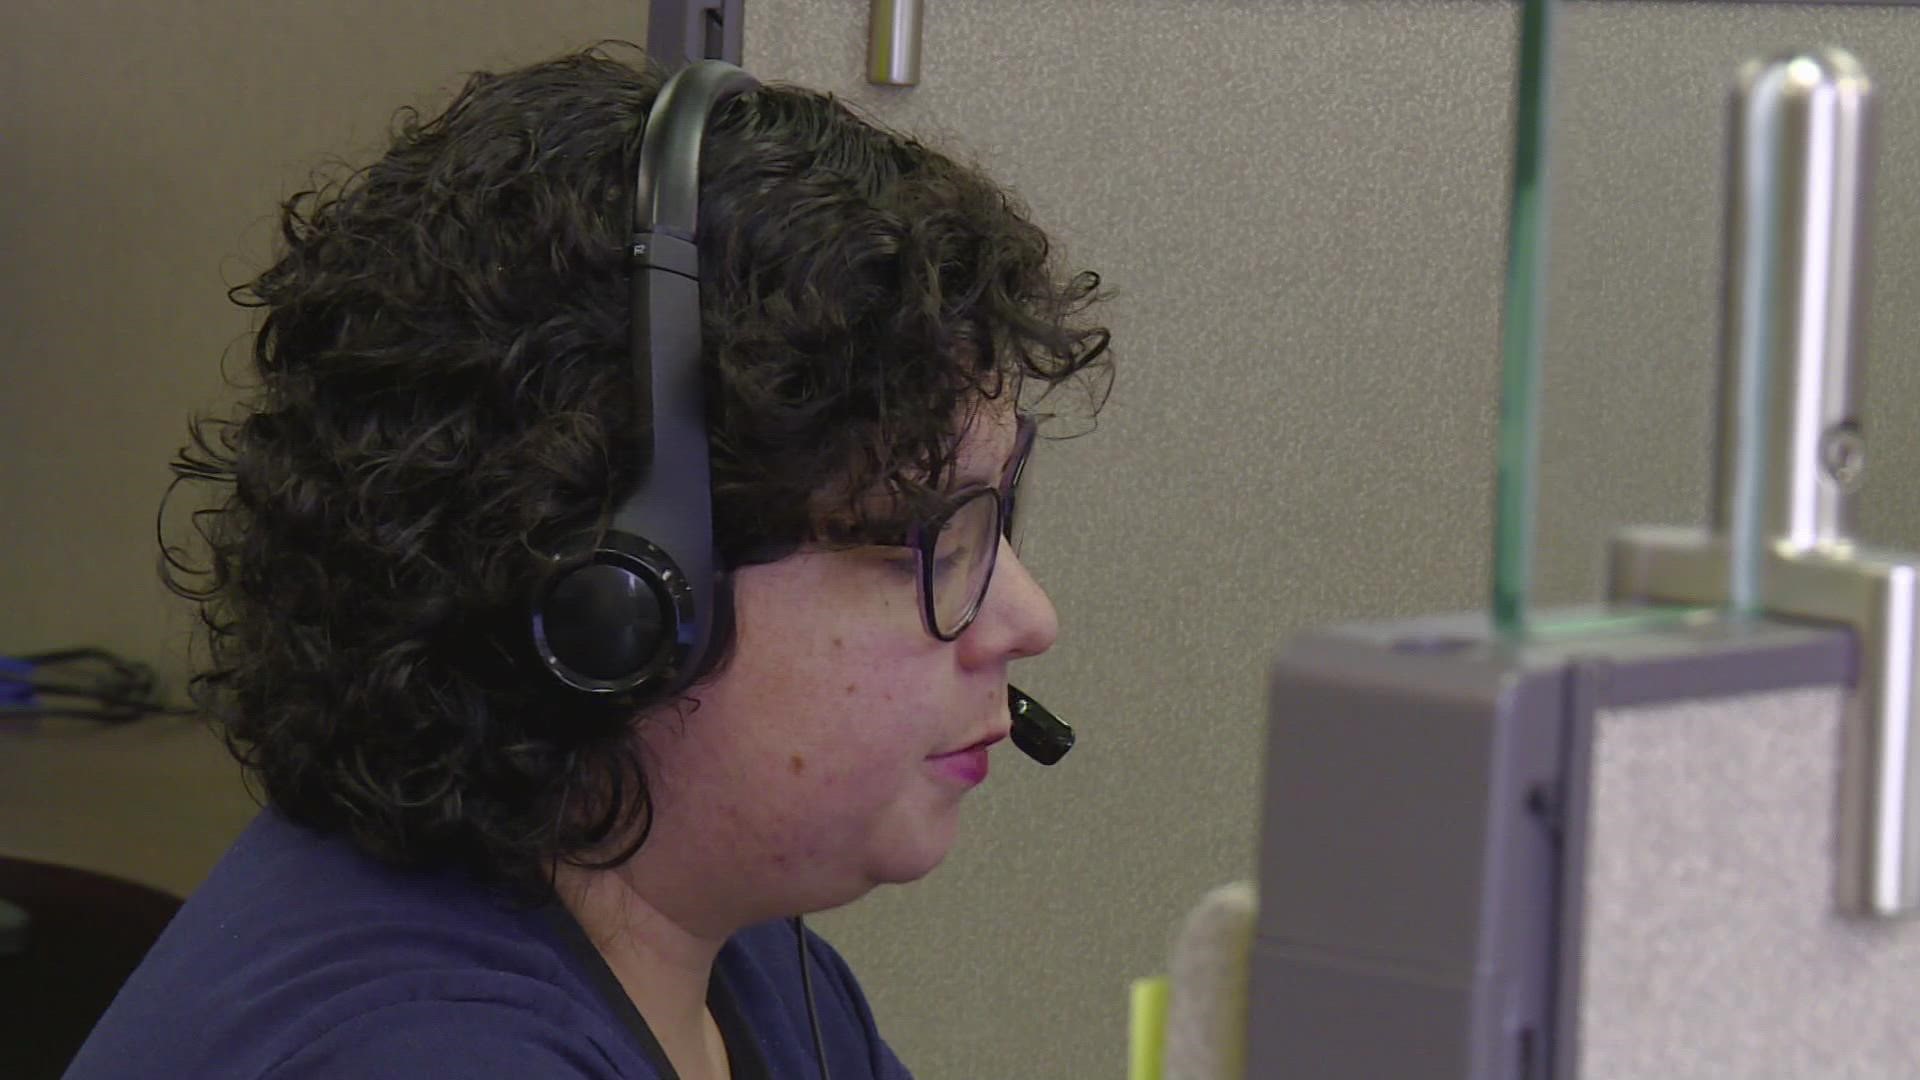 Getting mental health support will soon be as easy as dialing three digits. 988, the mental health version of the 911 emergency number, launches Saturday.